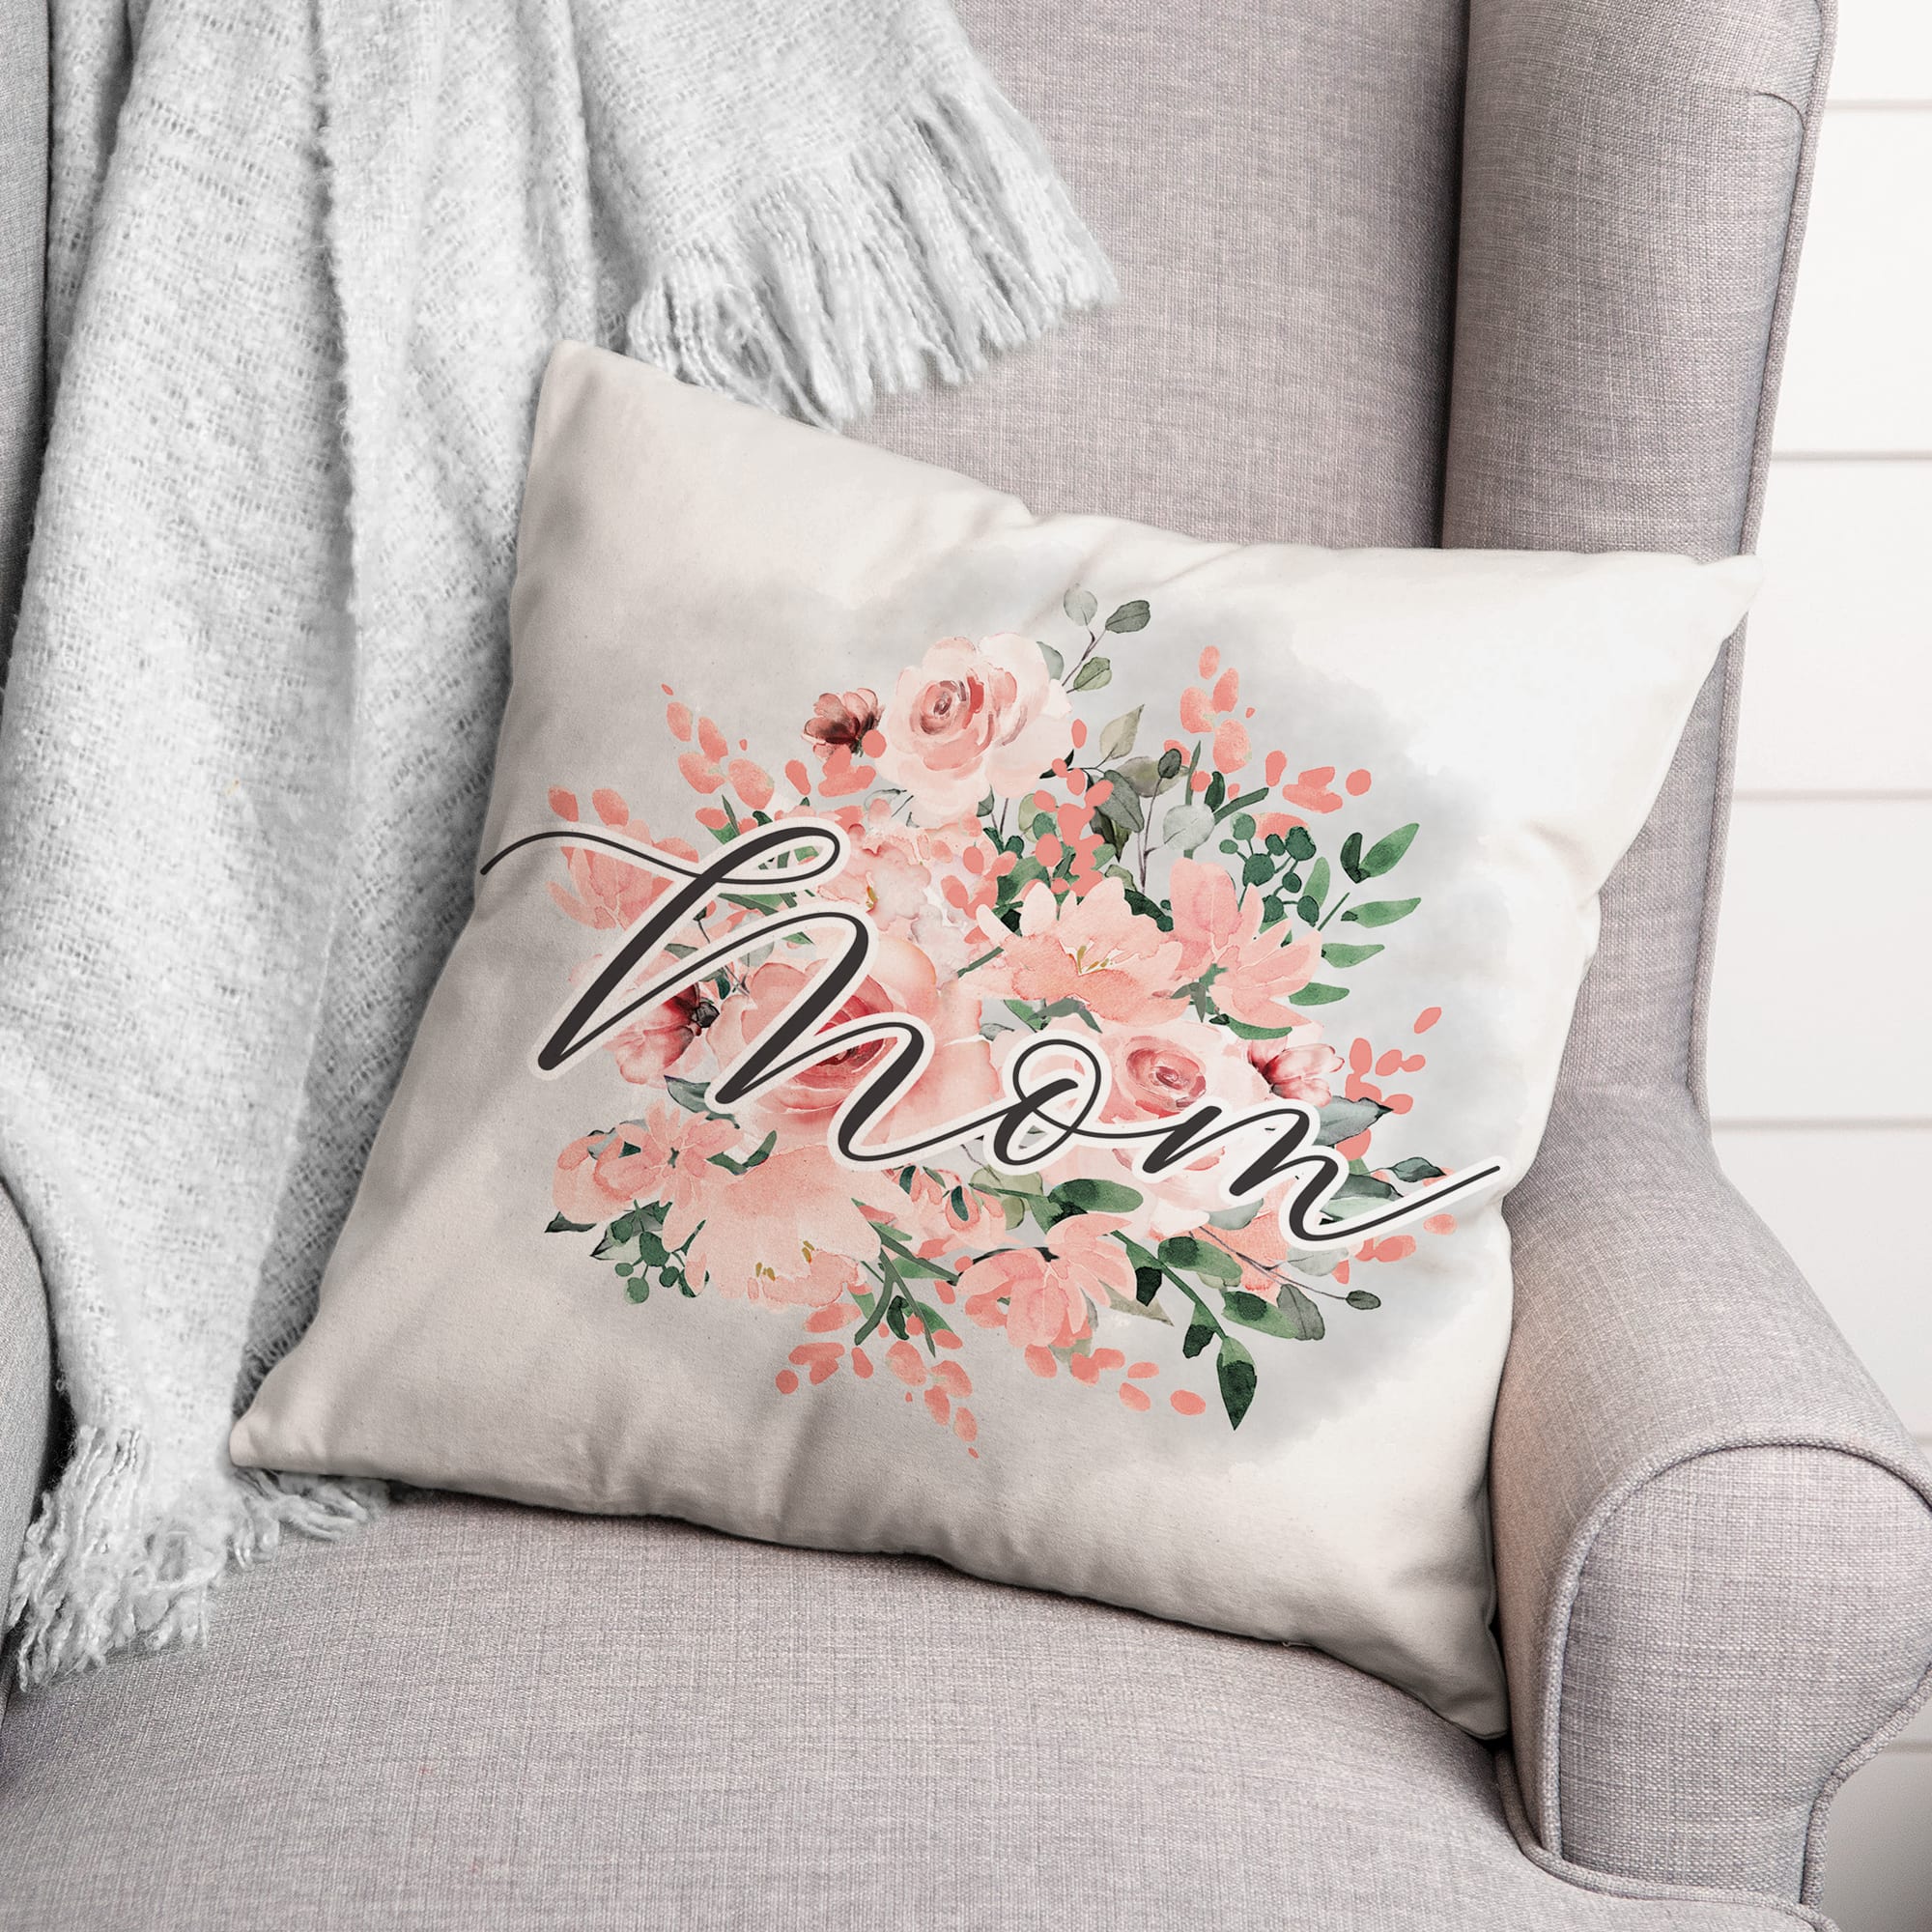 Mom Floral Throw Pillow